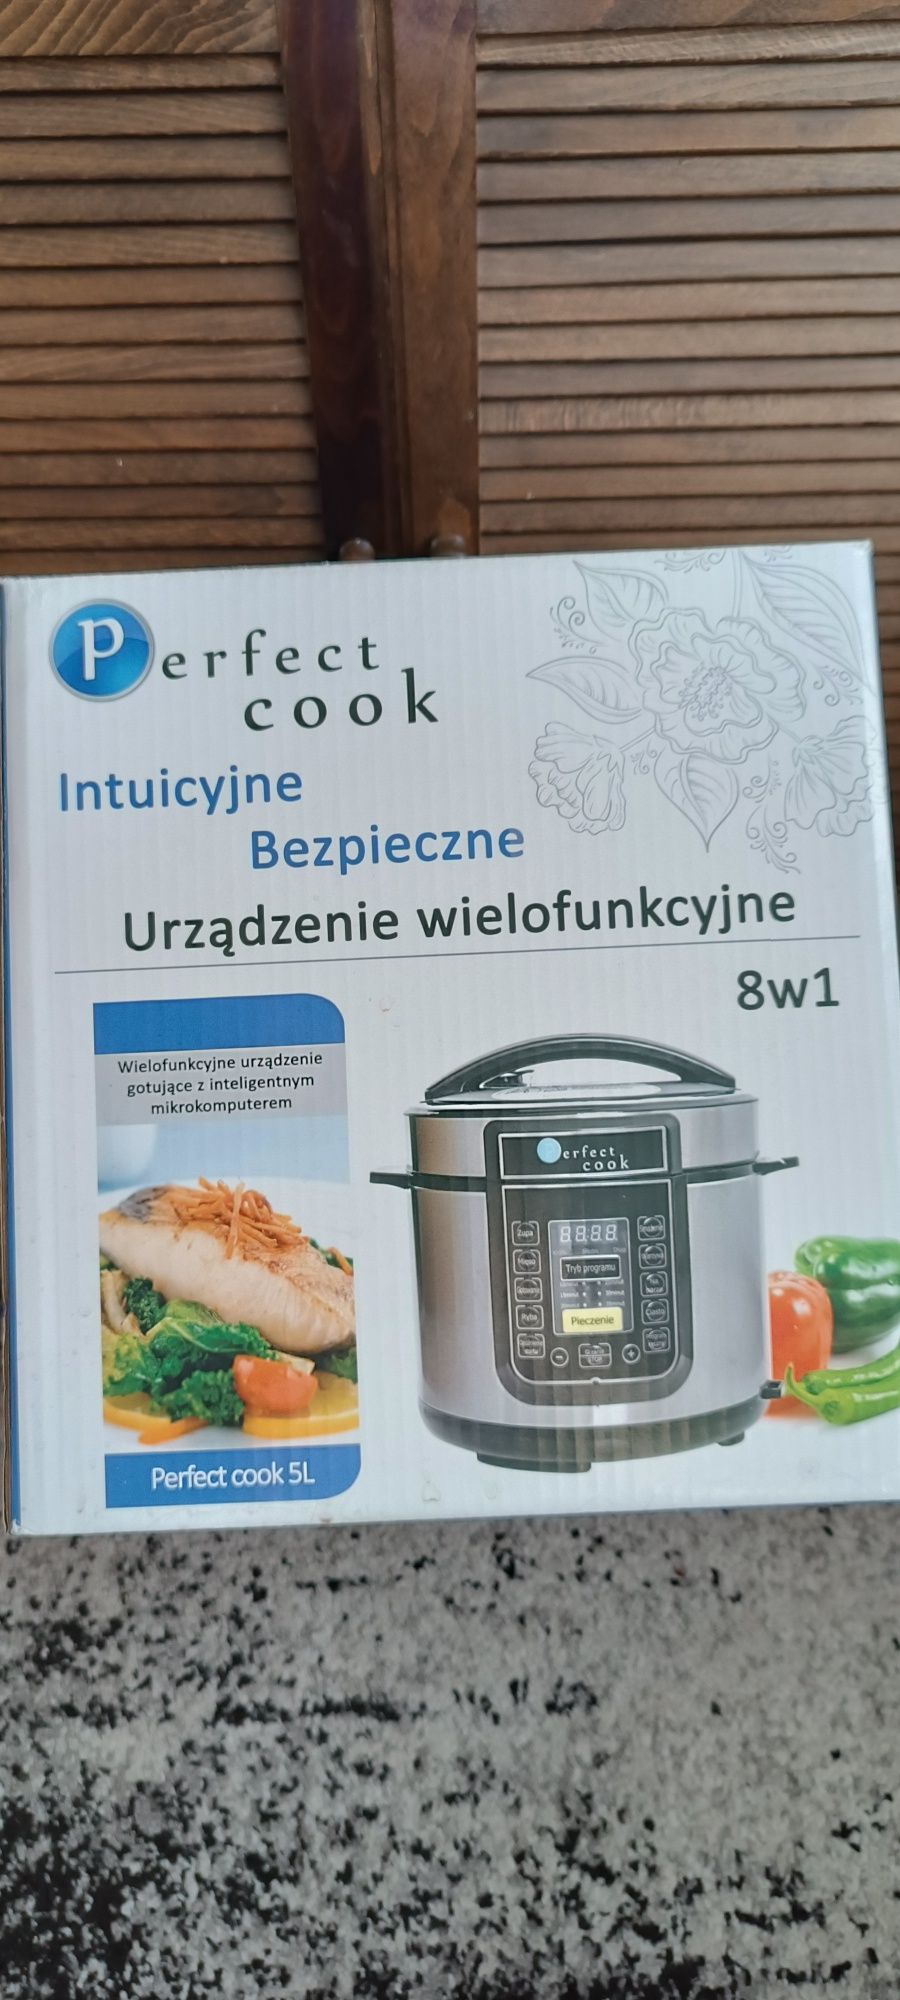 Perfect Cooker 8w1